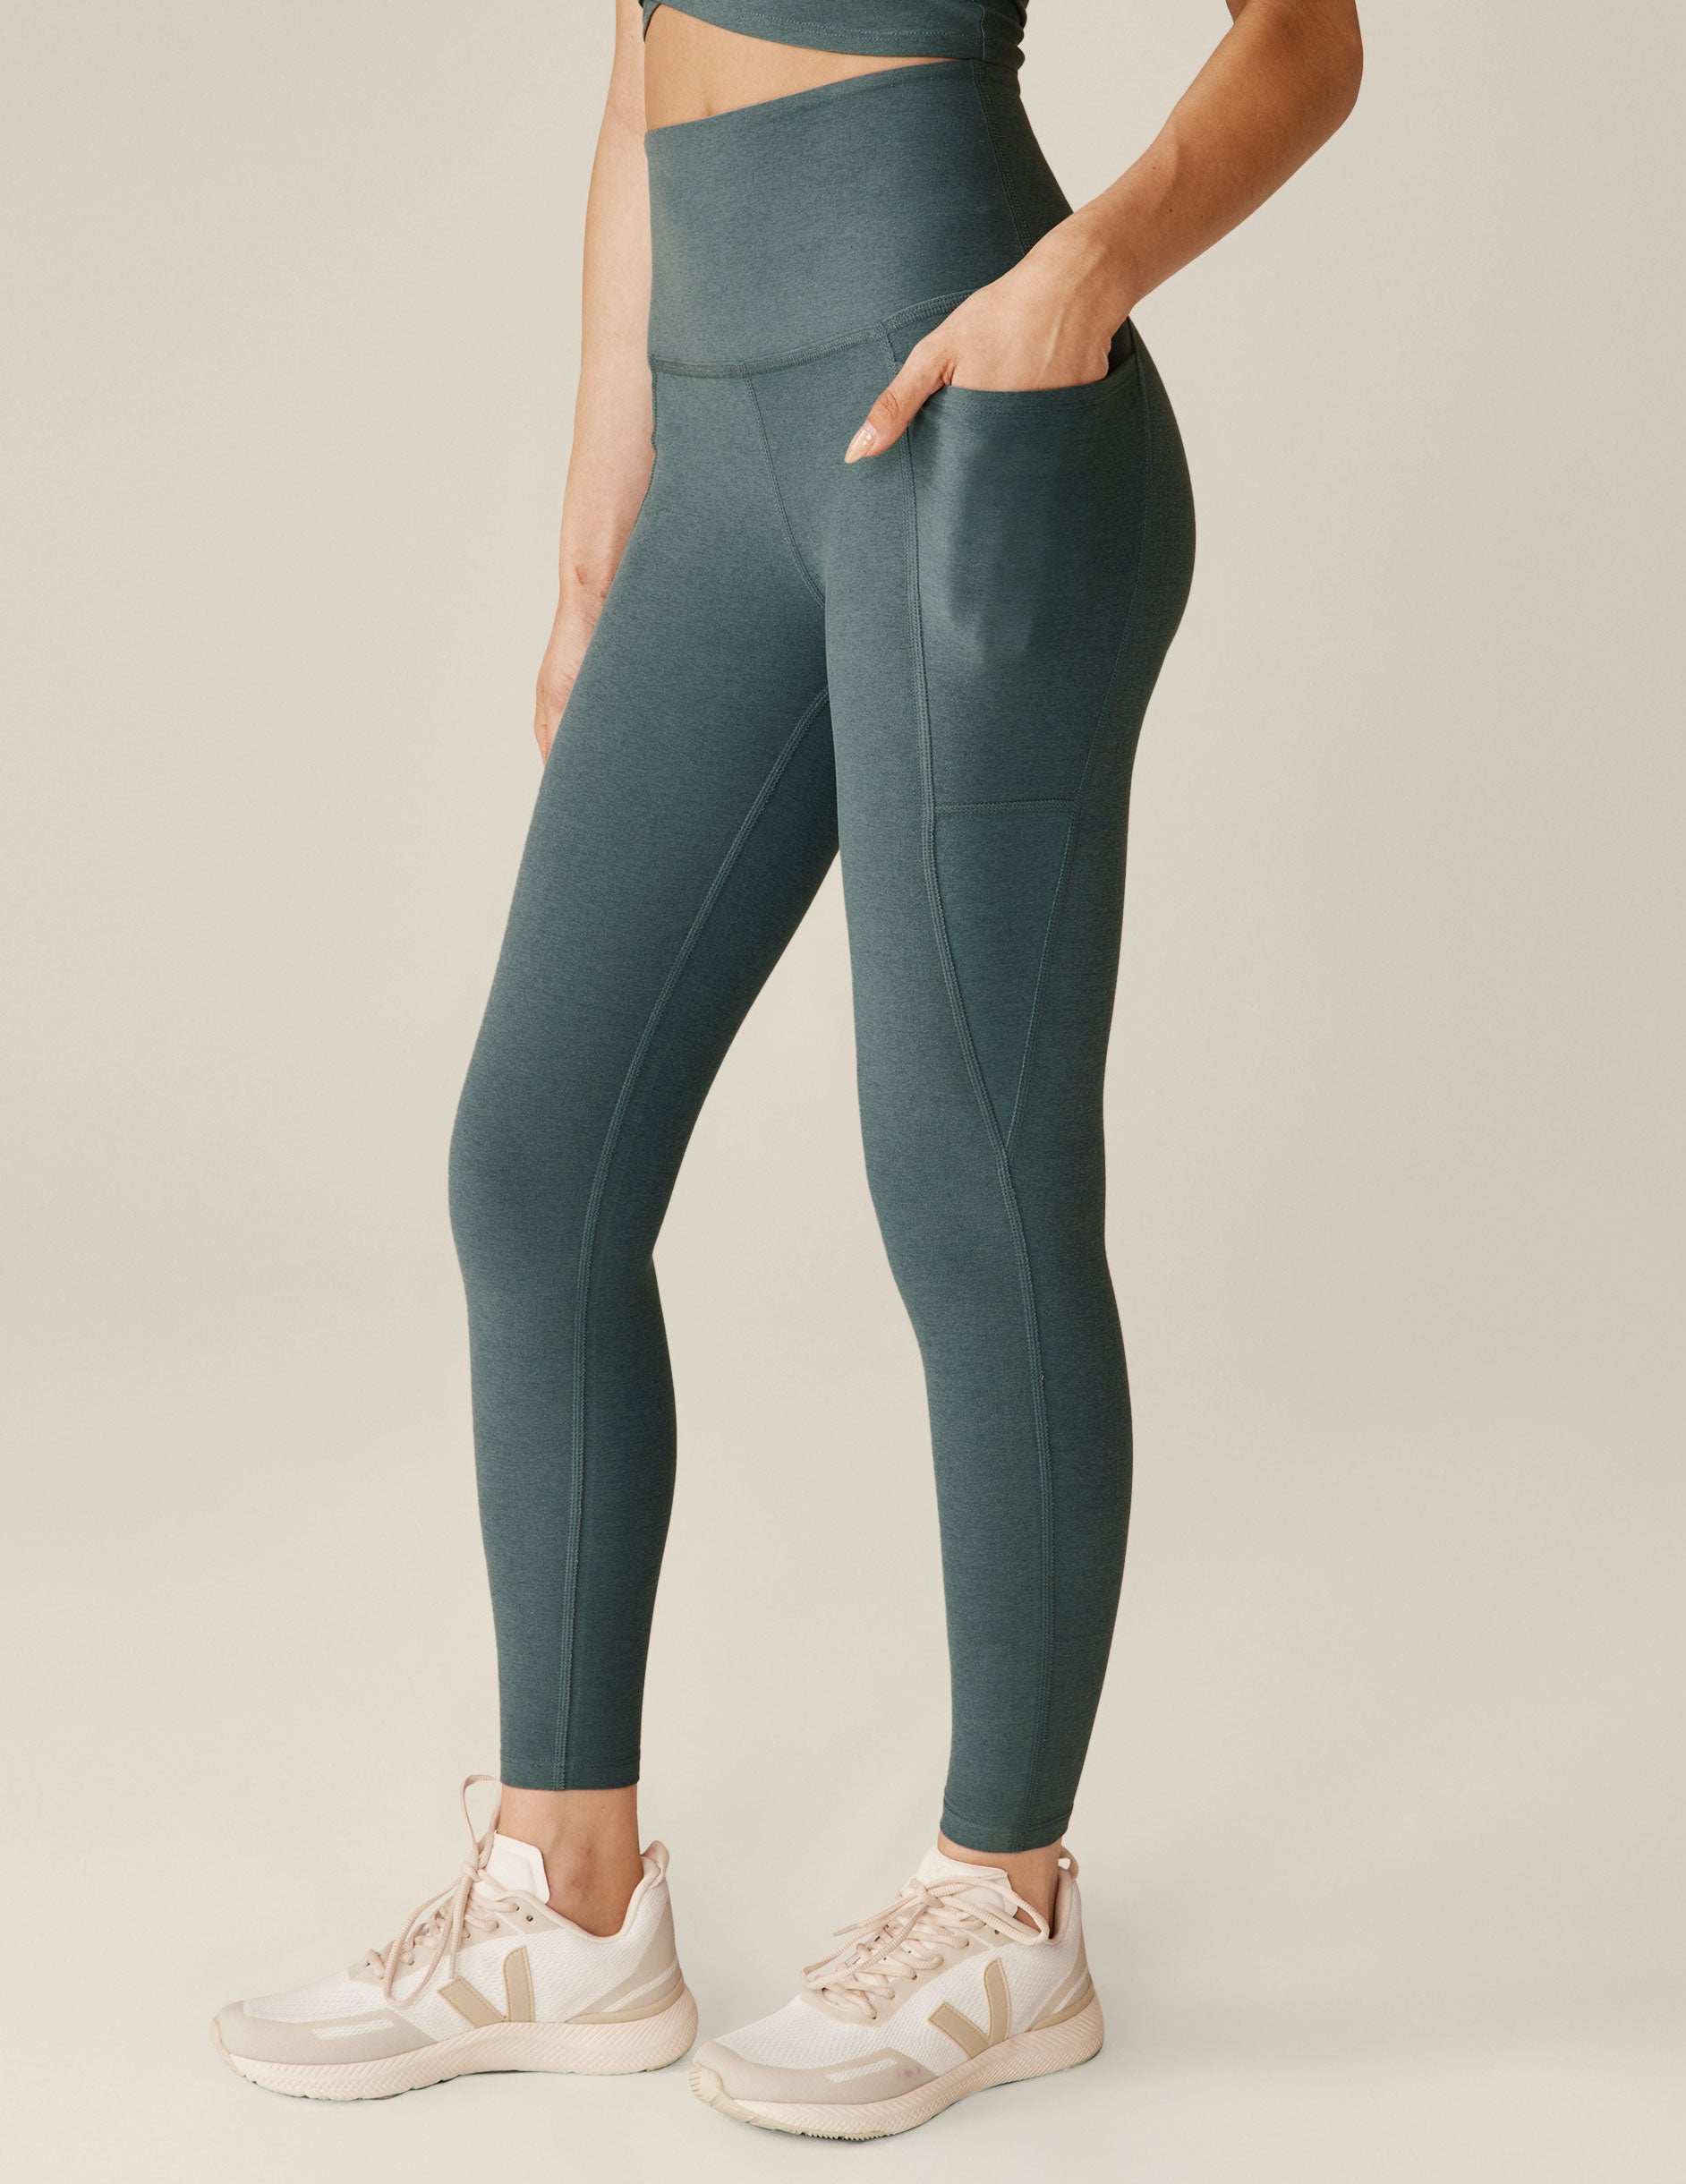 blue high-waisted midi leggings with pockets. 